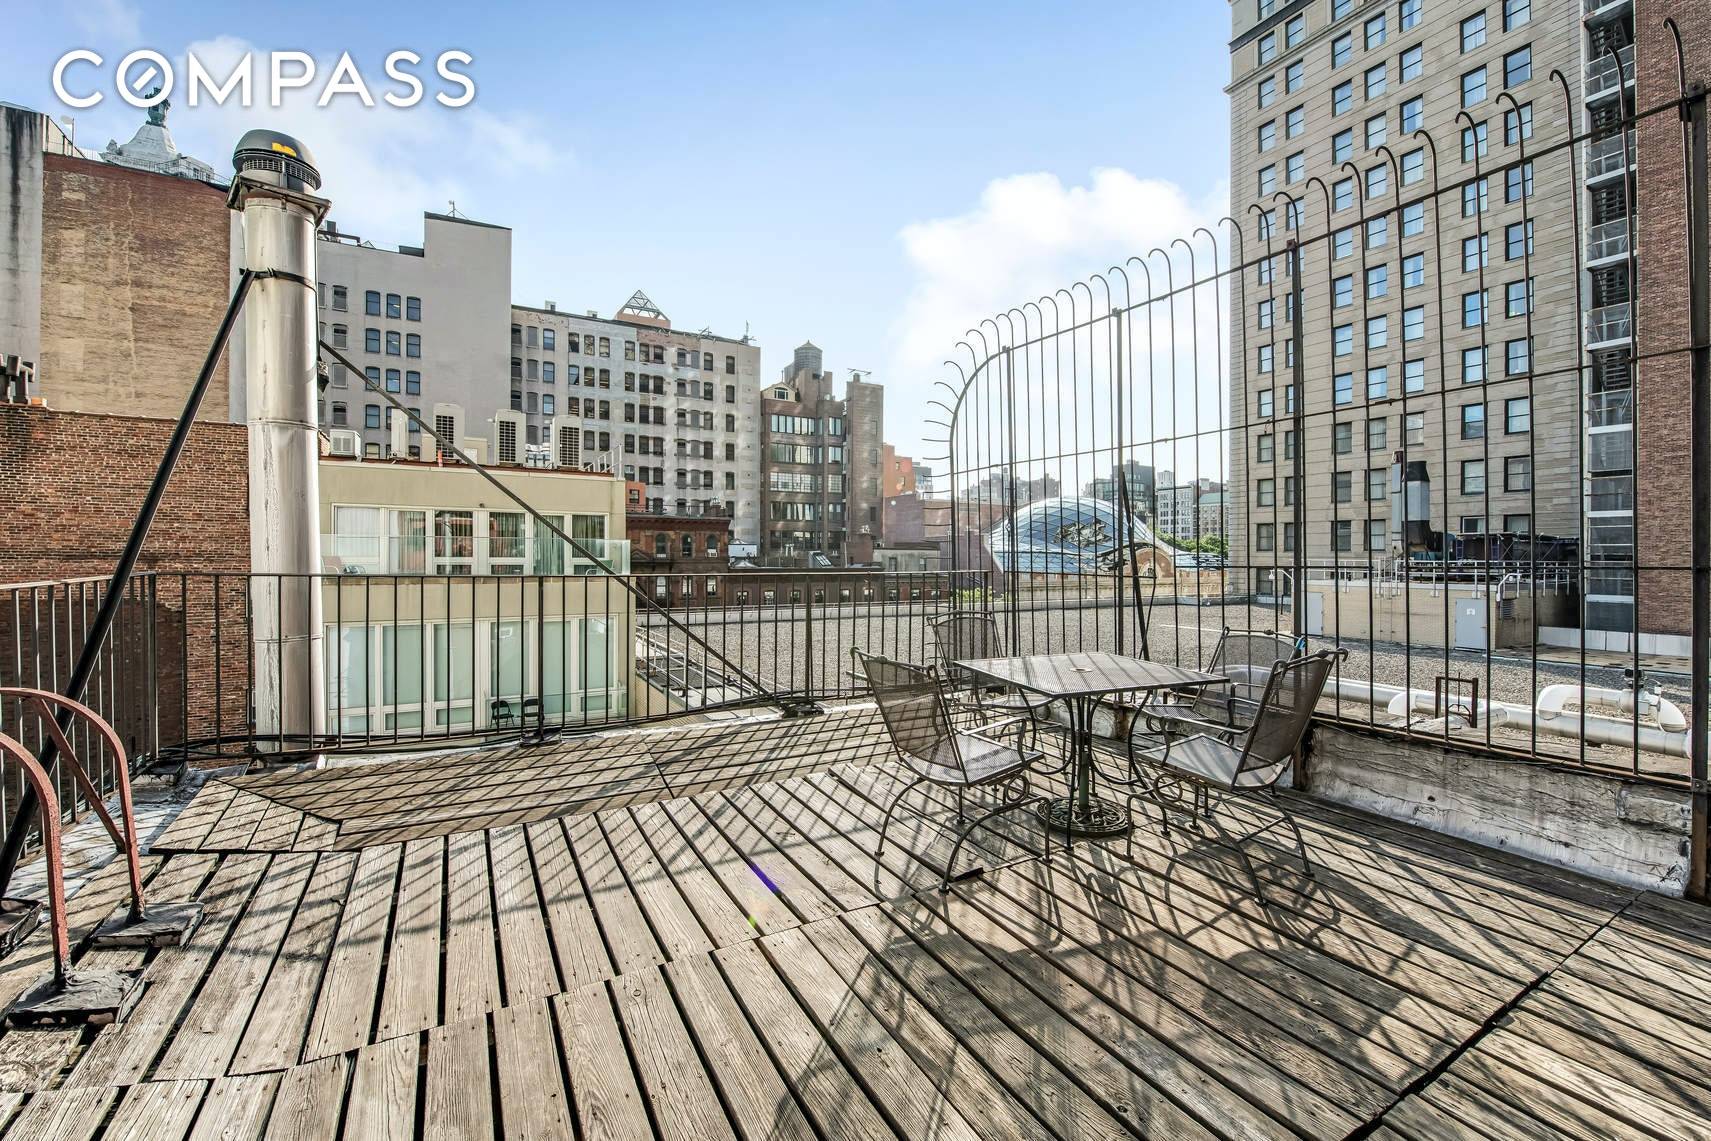 Welcome home to this Very Rare duplex penthouse with a Huge Private Terrace on top of a beautiful mansion, designed by famed architect Stephen Decatur Hatch and built in 1868.